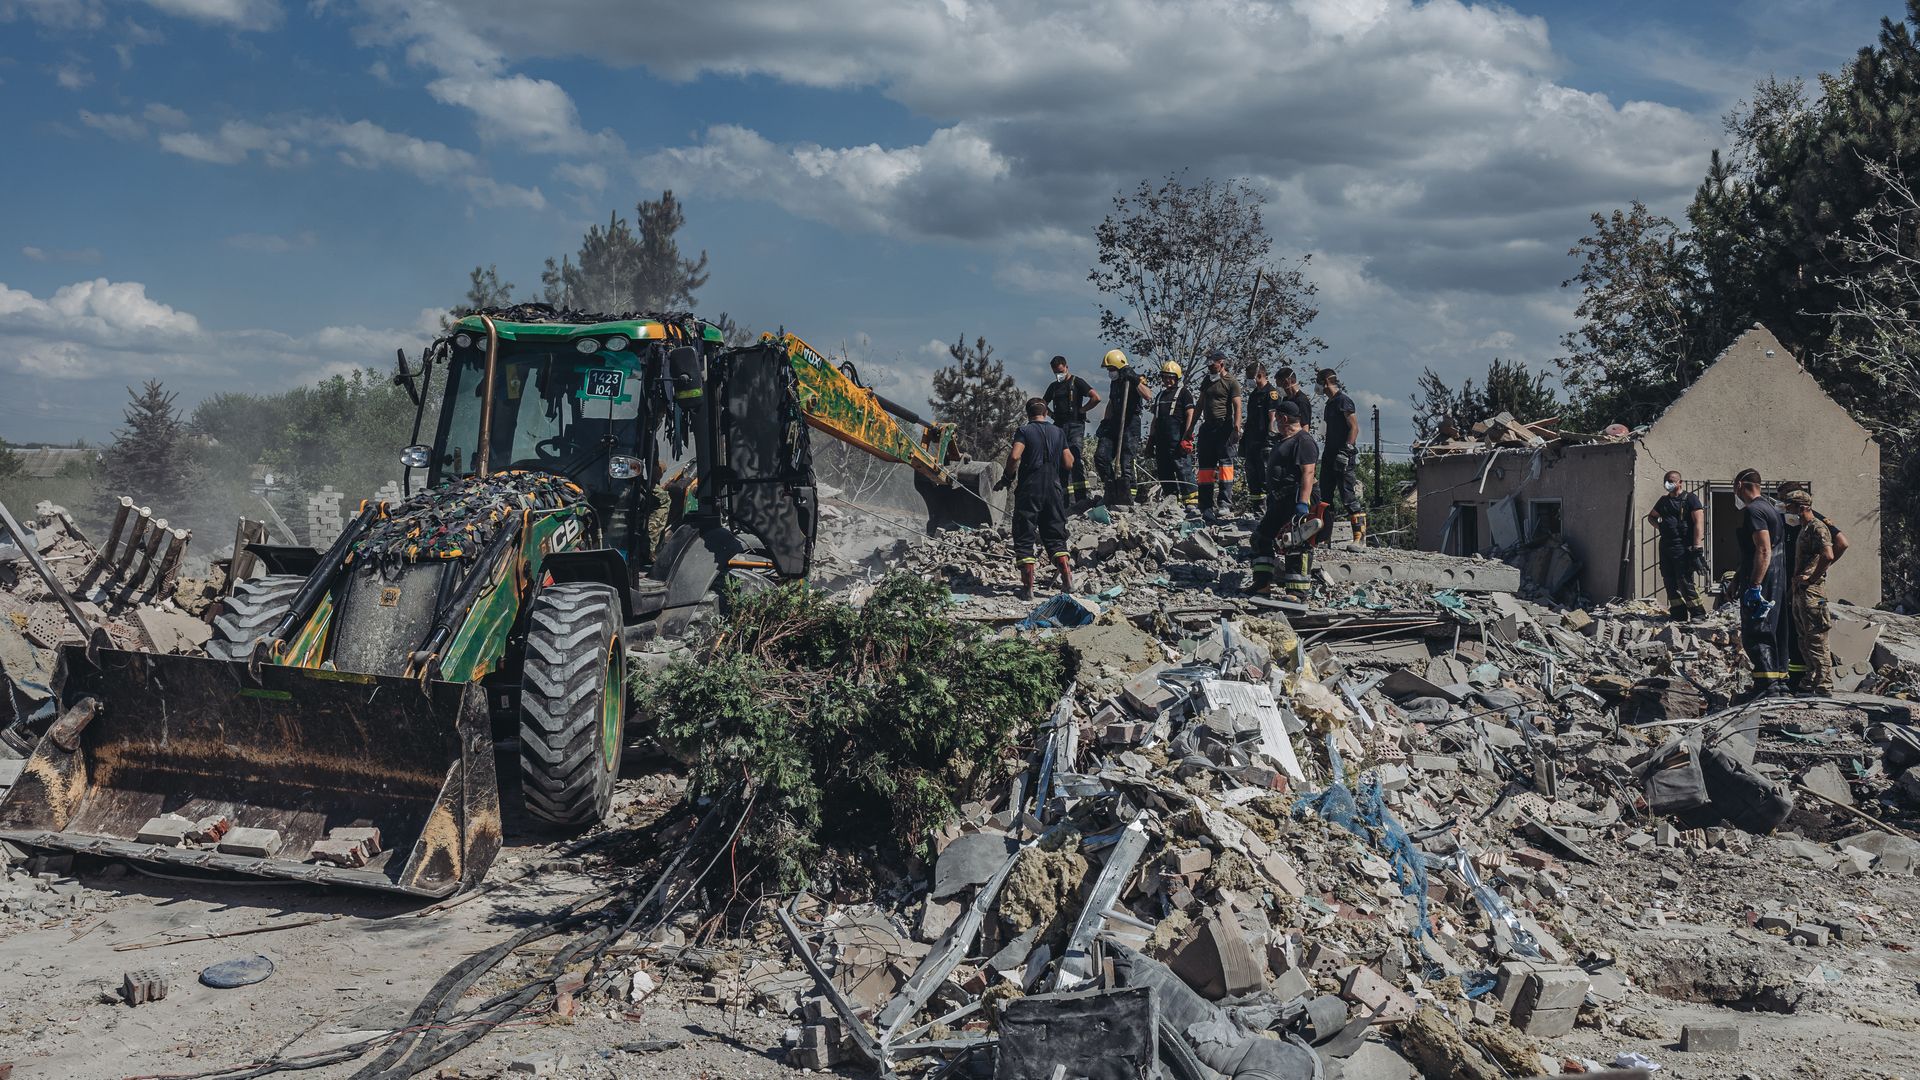 Emergency workers search for people under the rubble after the Russian shelling in Kramatorsk, Ukraine.